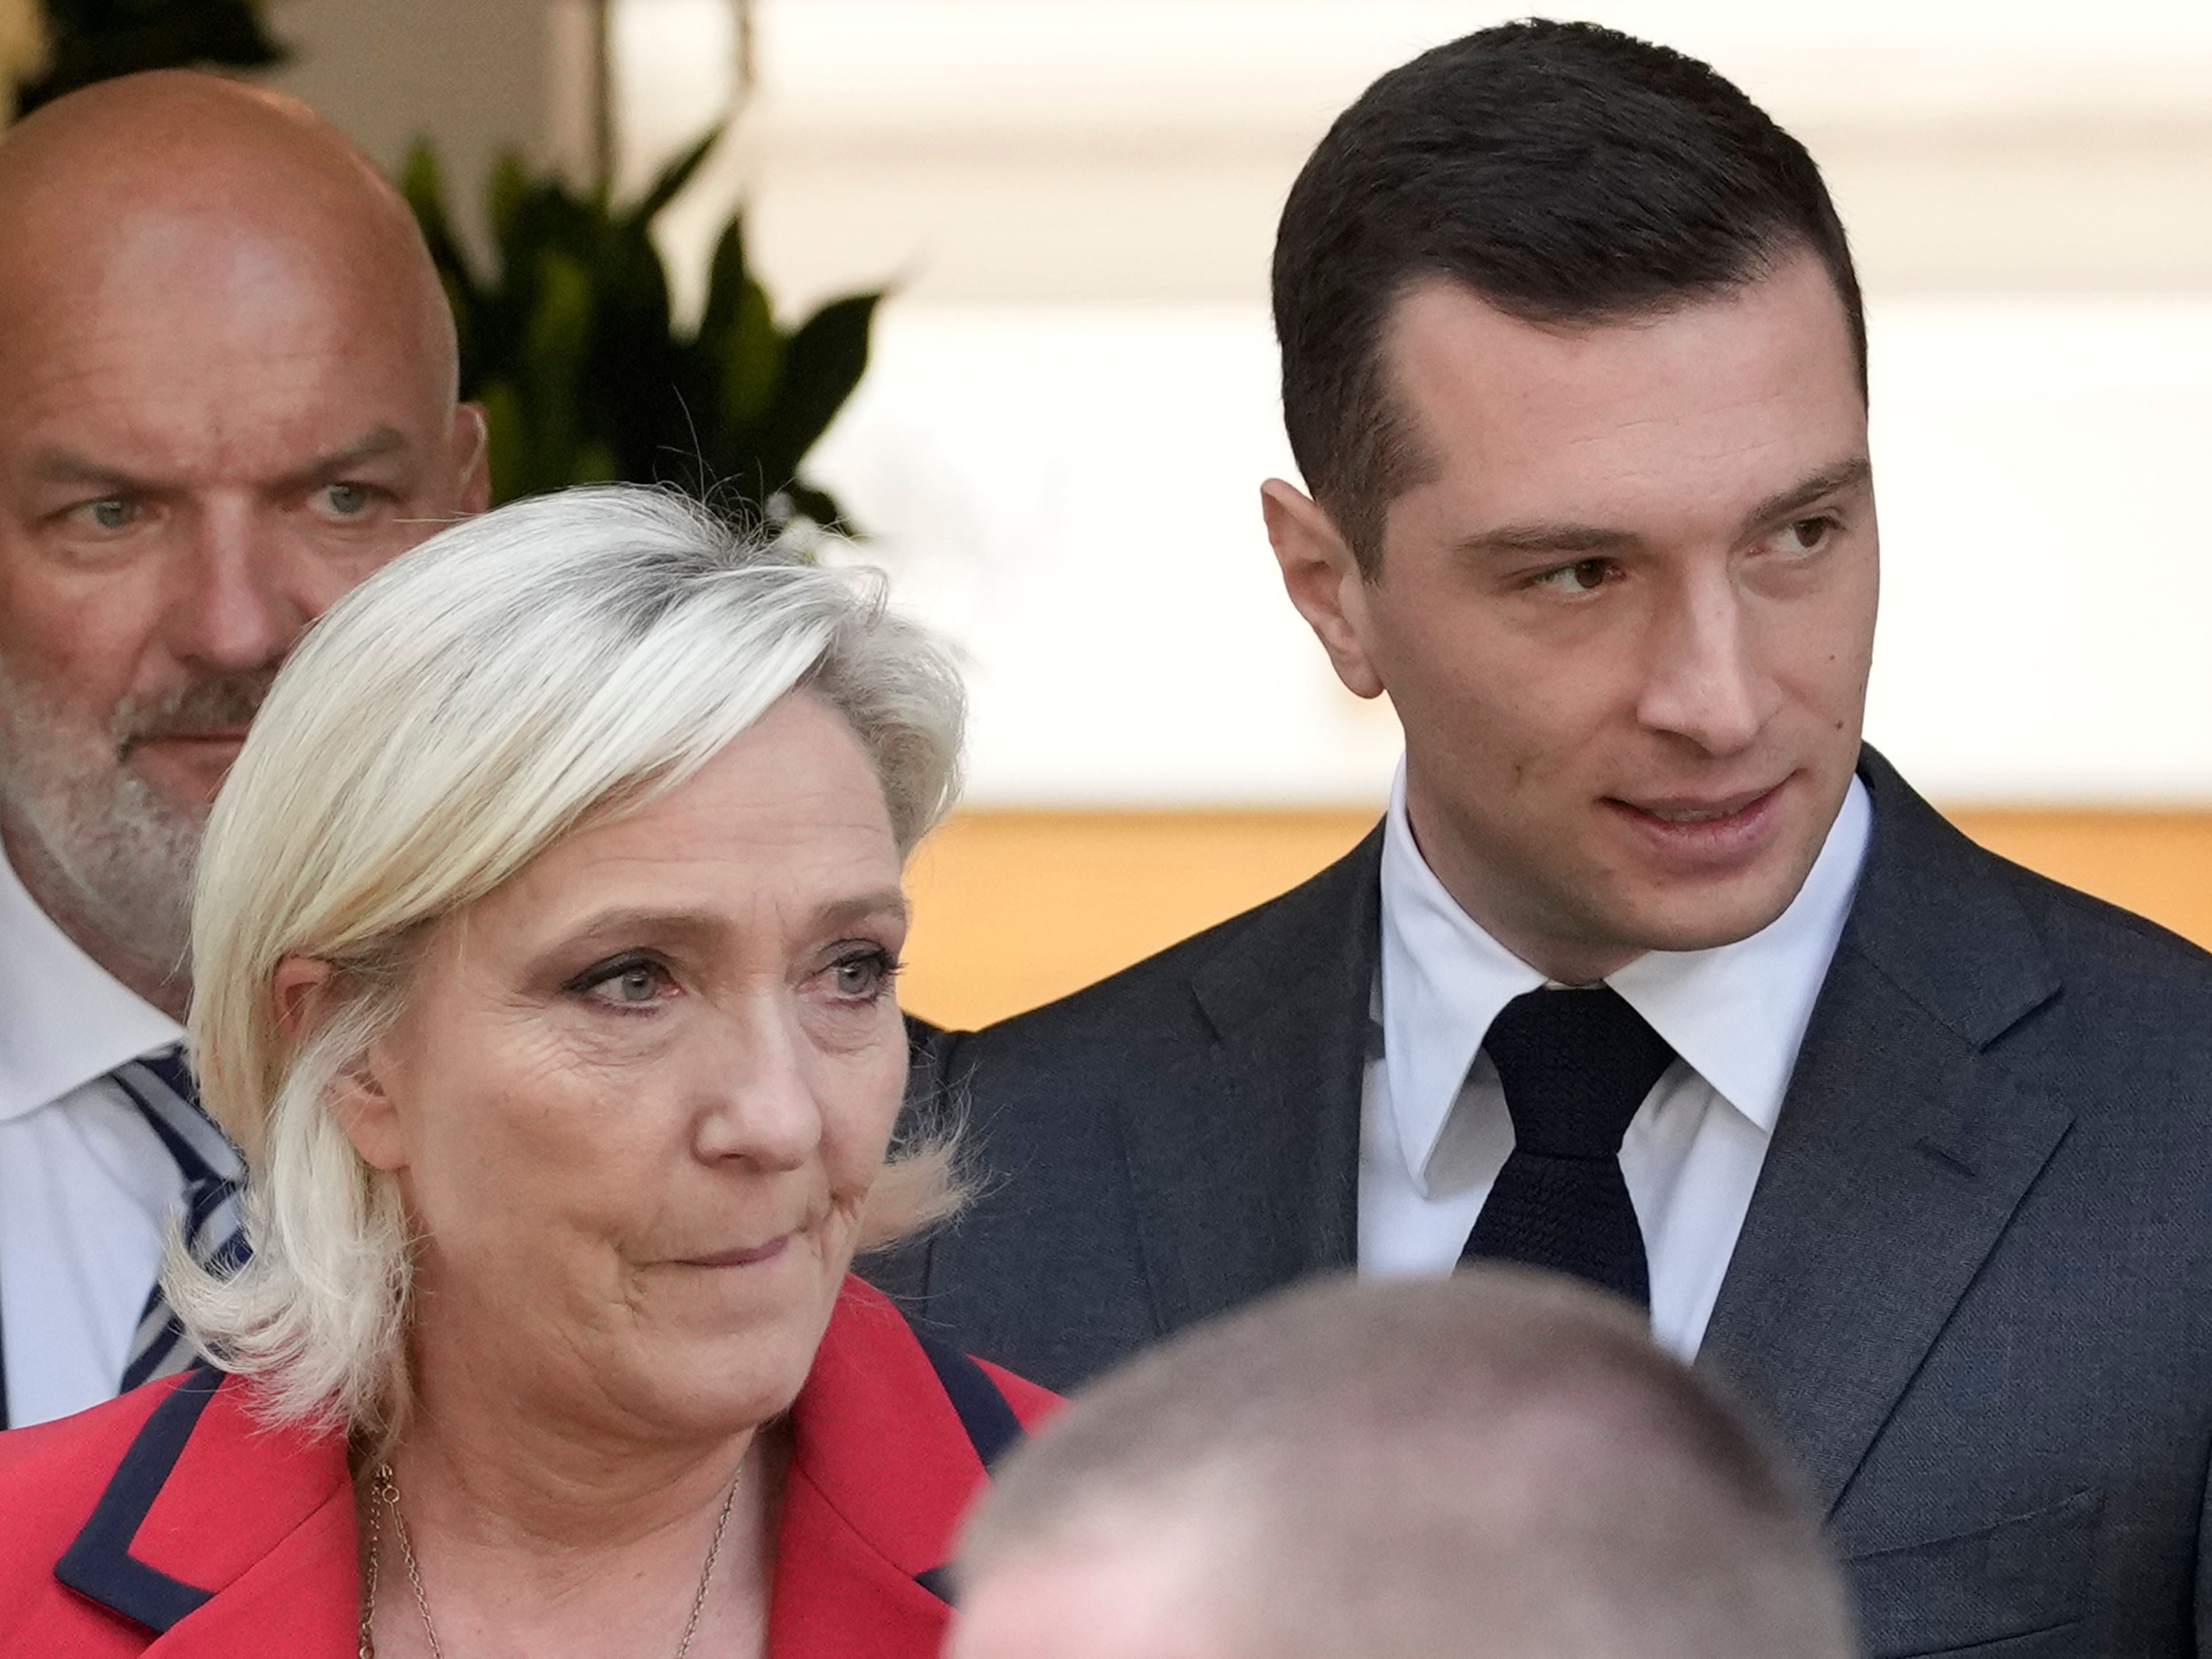 Marine Le Pen questions French president’s role as army chief ahead of elections